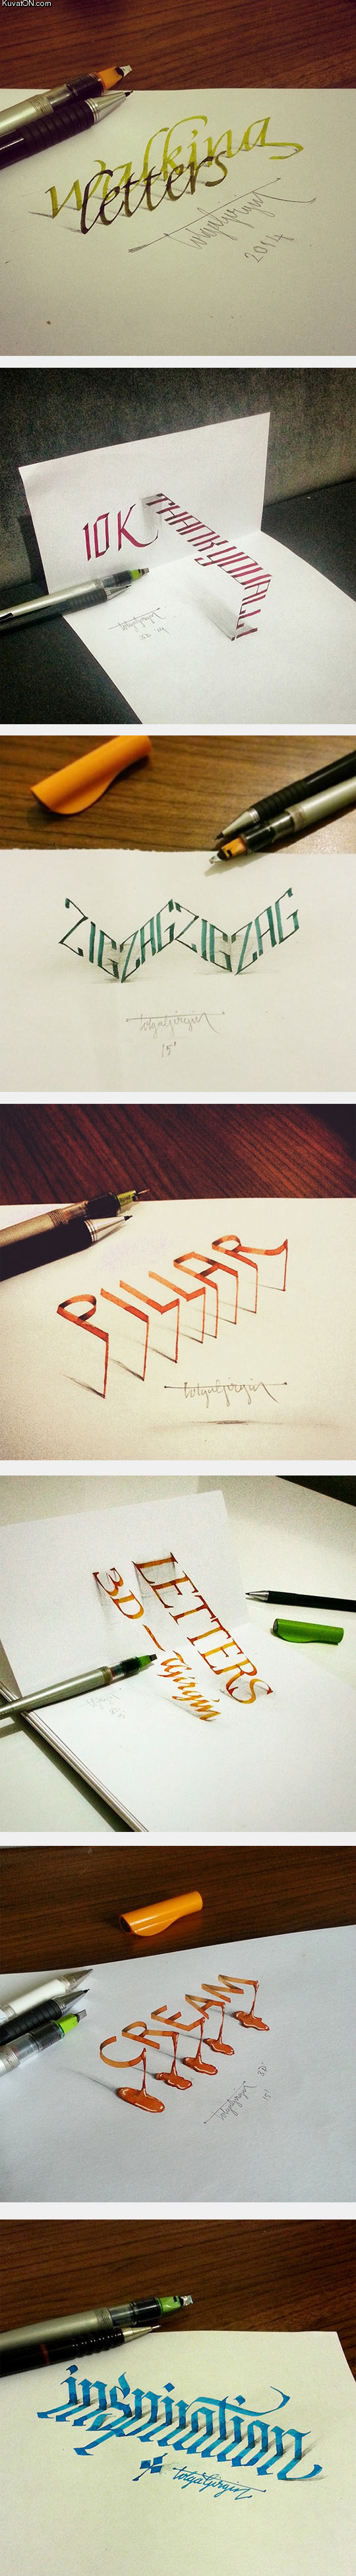 amazing_examples_of_anamorphic_lettering.jpg